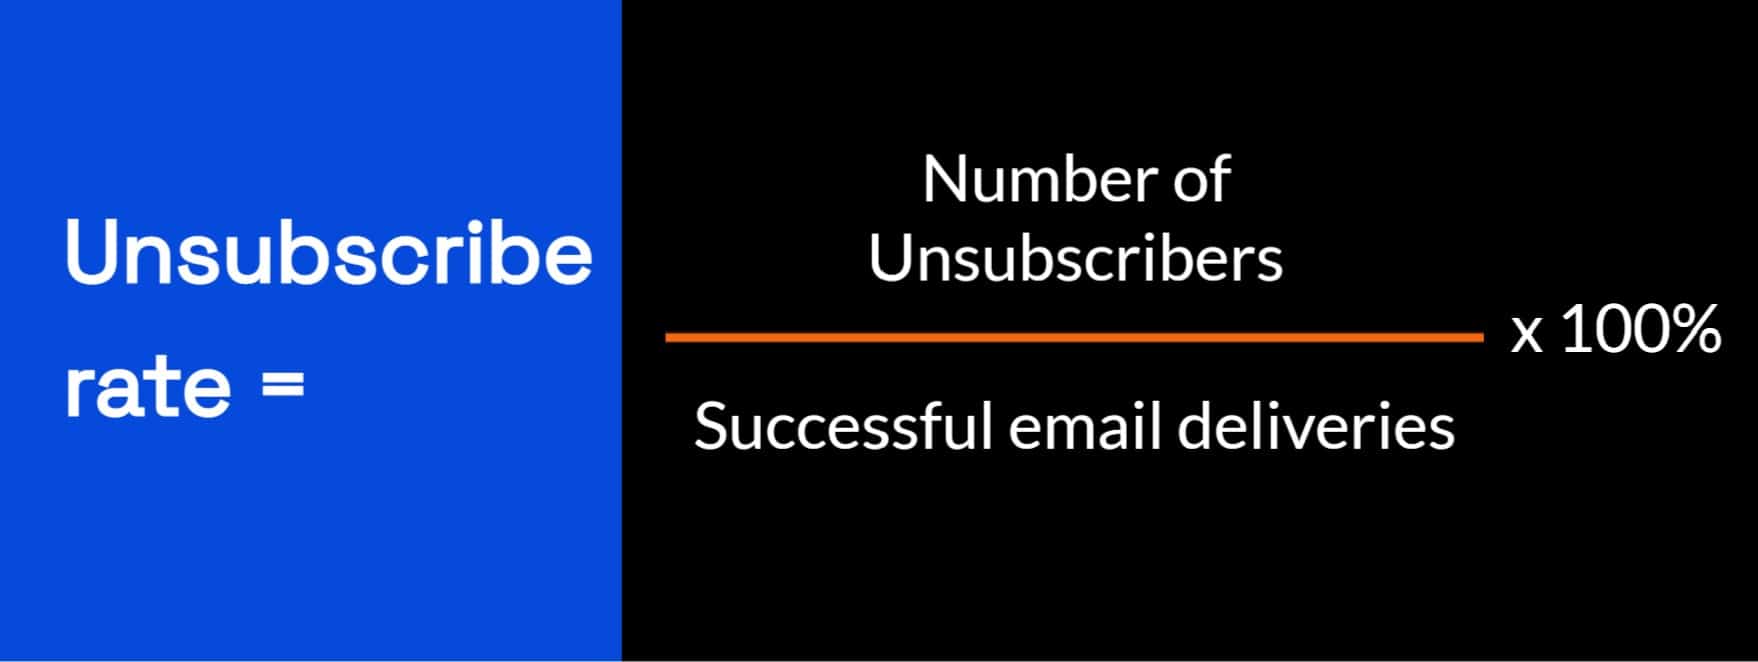 email metrics unsubscribe rate